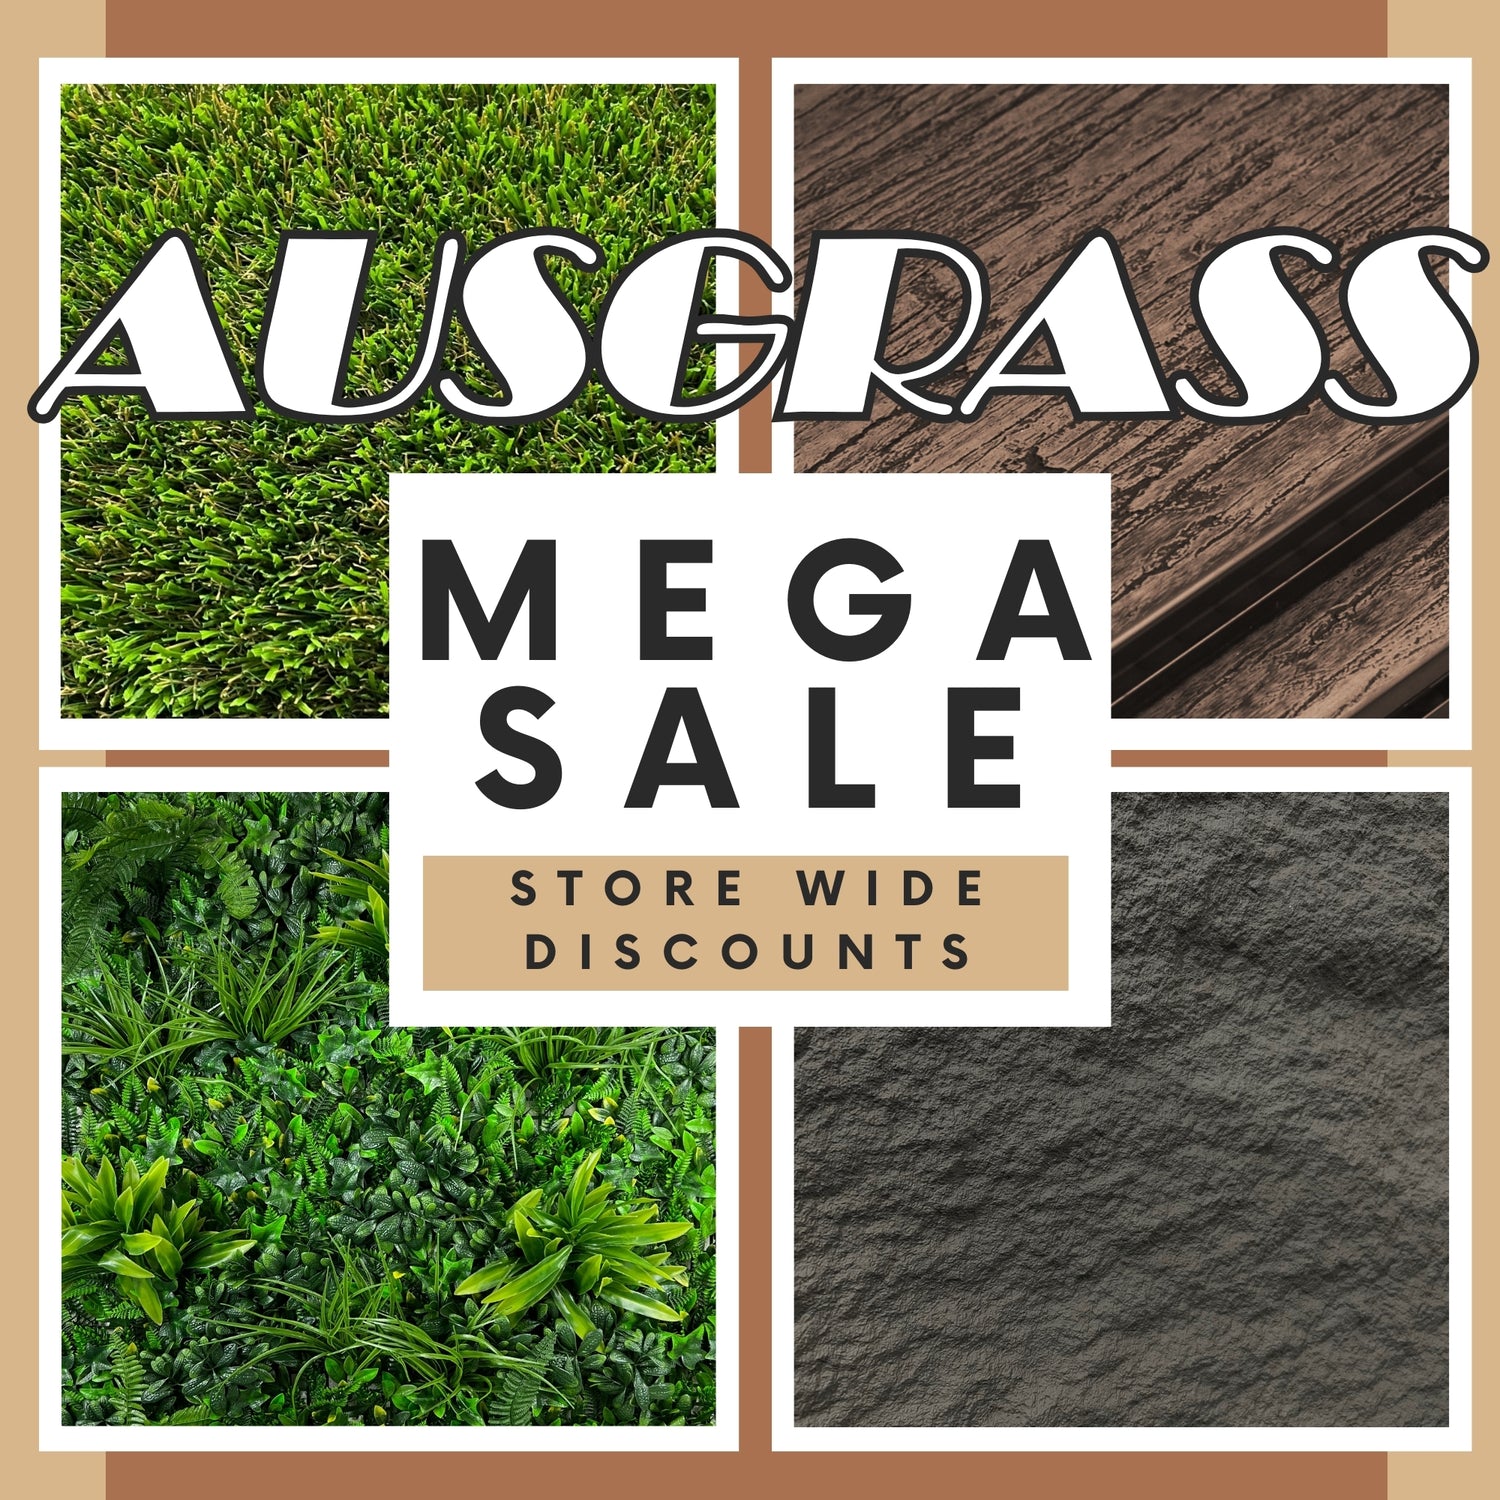 ausgrass artificial grass fake turf synthetic lawn fake decking composite deck fake wood marble stone fake stone tiles garden walls artificial plants fake green wall